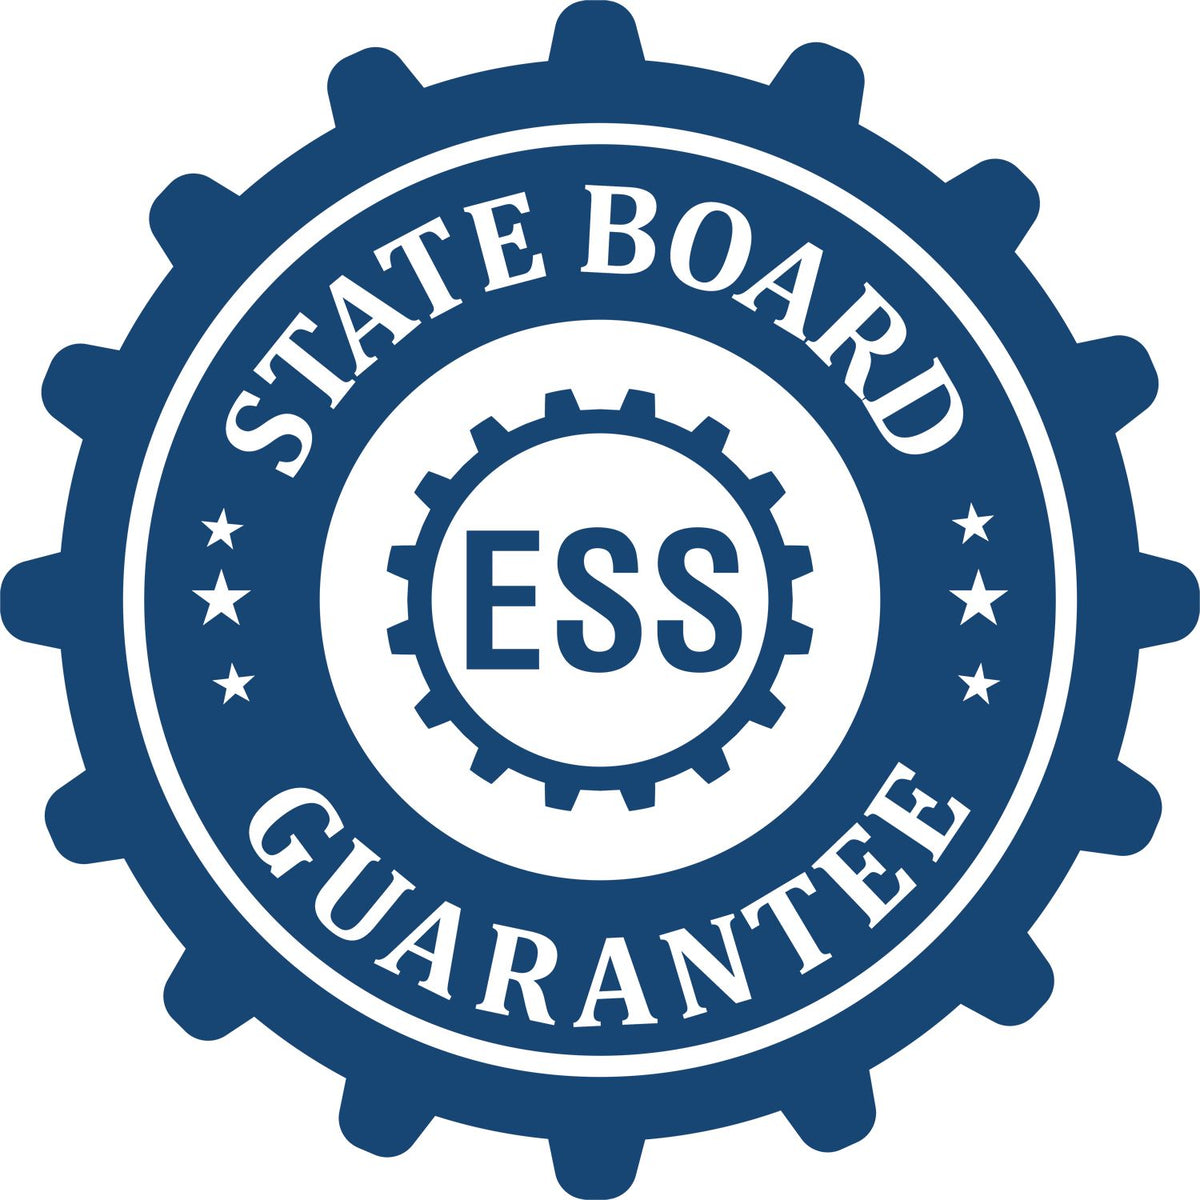 An emblem in a gear shape illustrating a state board guarantee for the Hybrid Missouri Engineer Seal